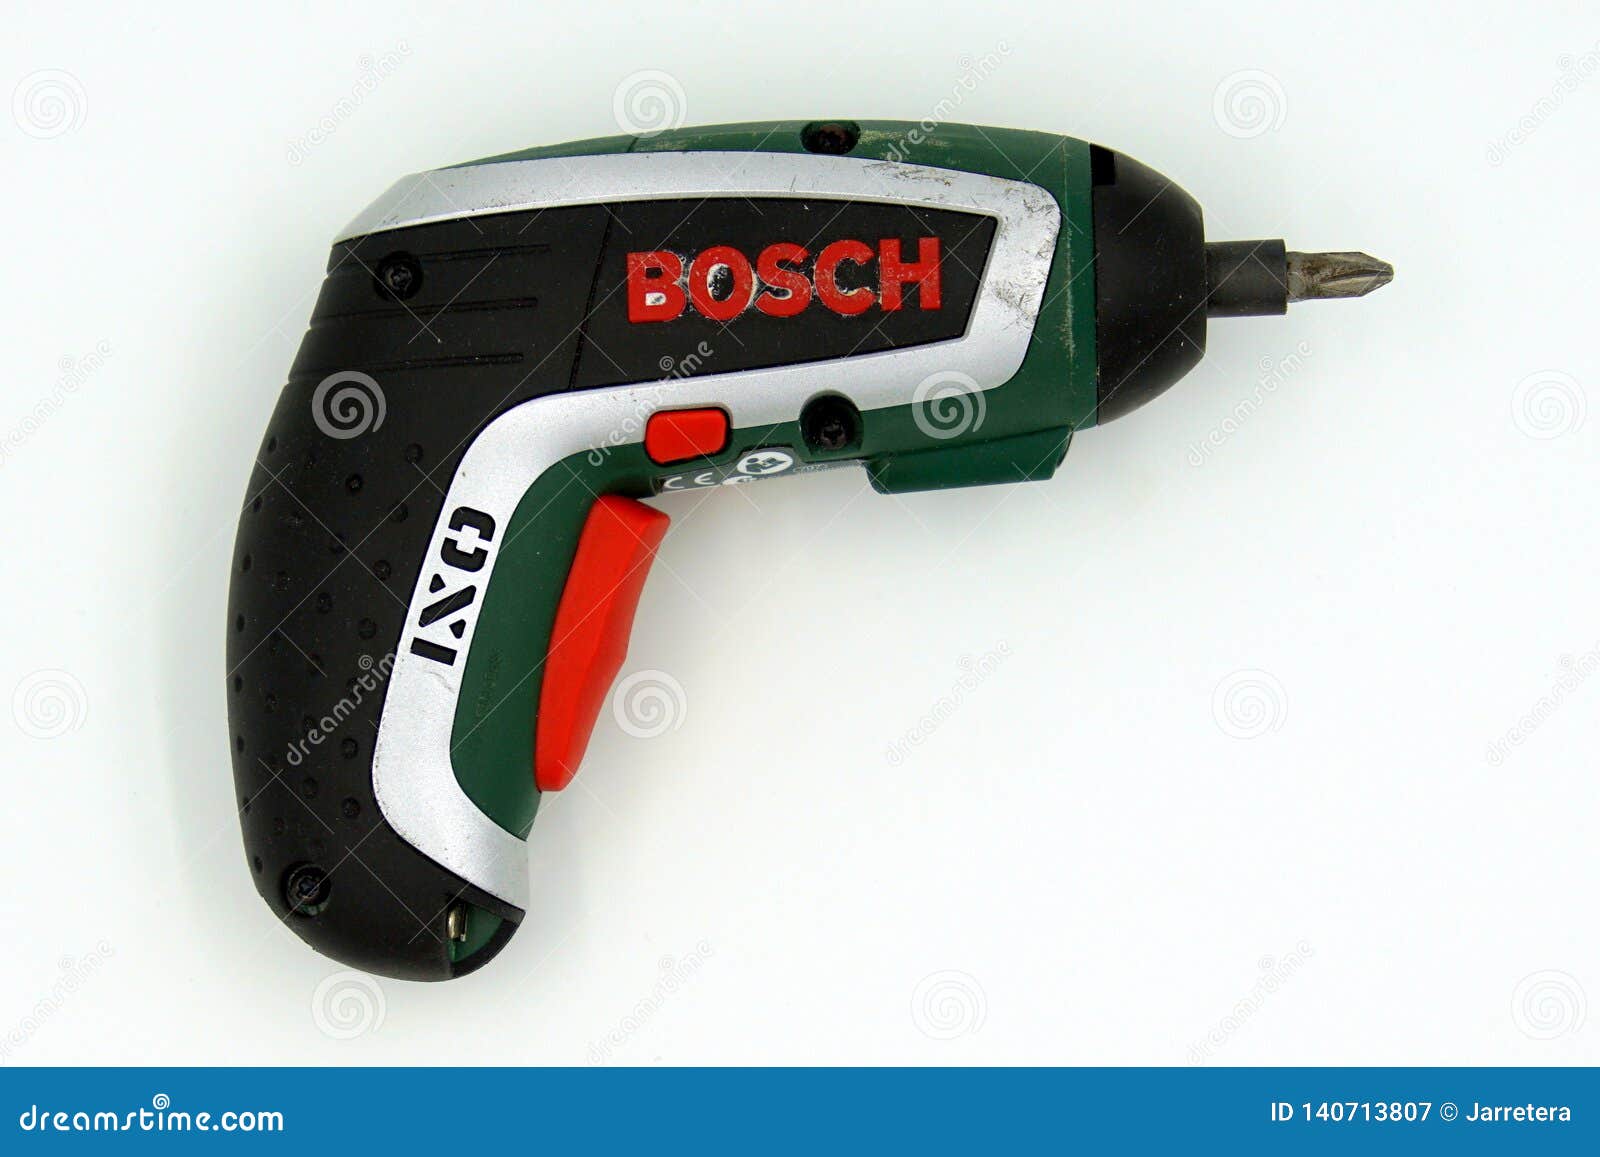 https://thumbs.dreamstime.com/z/bosch-ixo-electric-screwdriver-amsterdam-netherlands-march-used-against-white-background-140713807.jpg